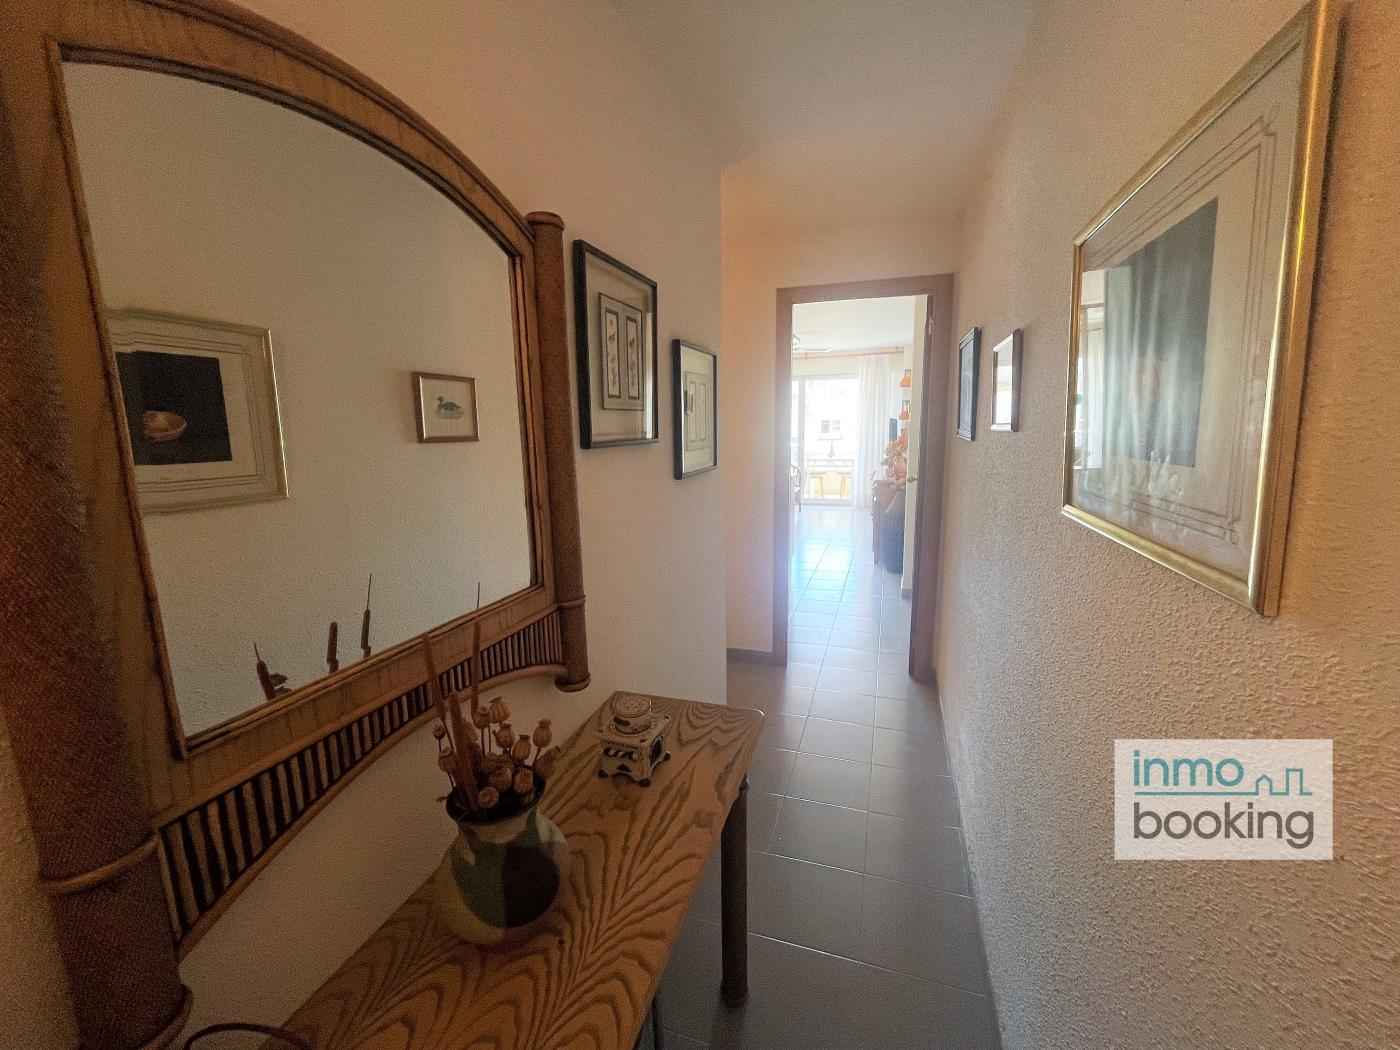 Diamant Apartment, with parking and close to the beach. in Salou